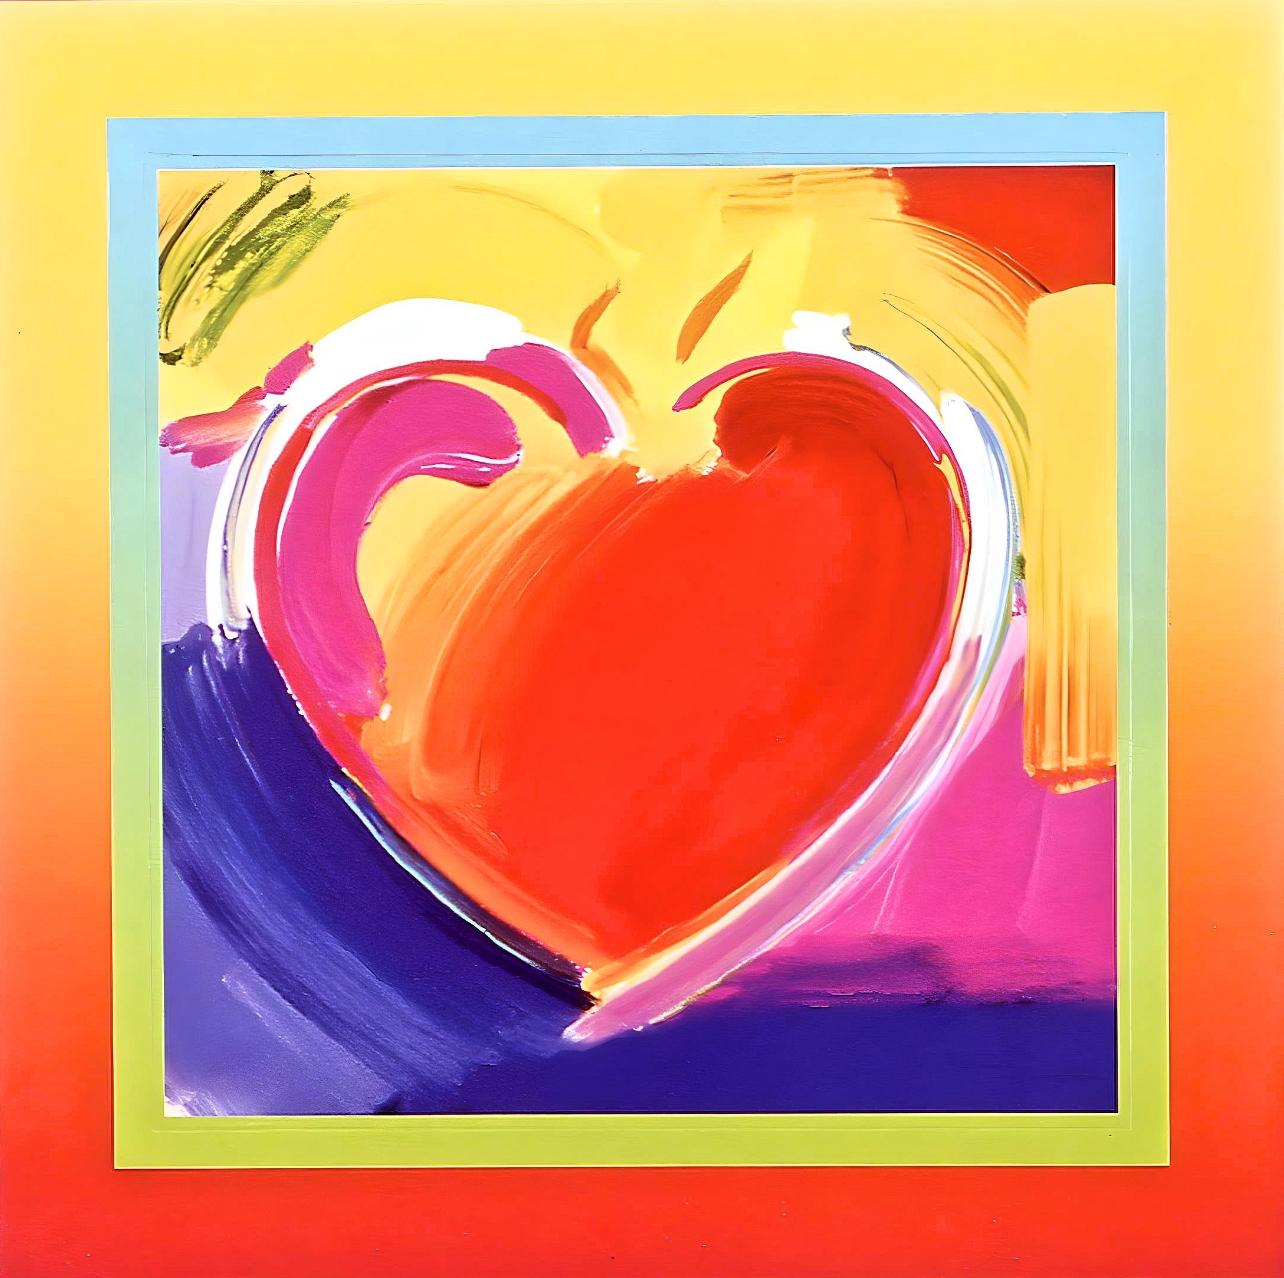 Heart on Blends, Peter Max 1